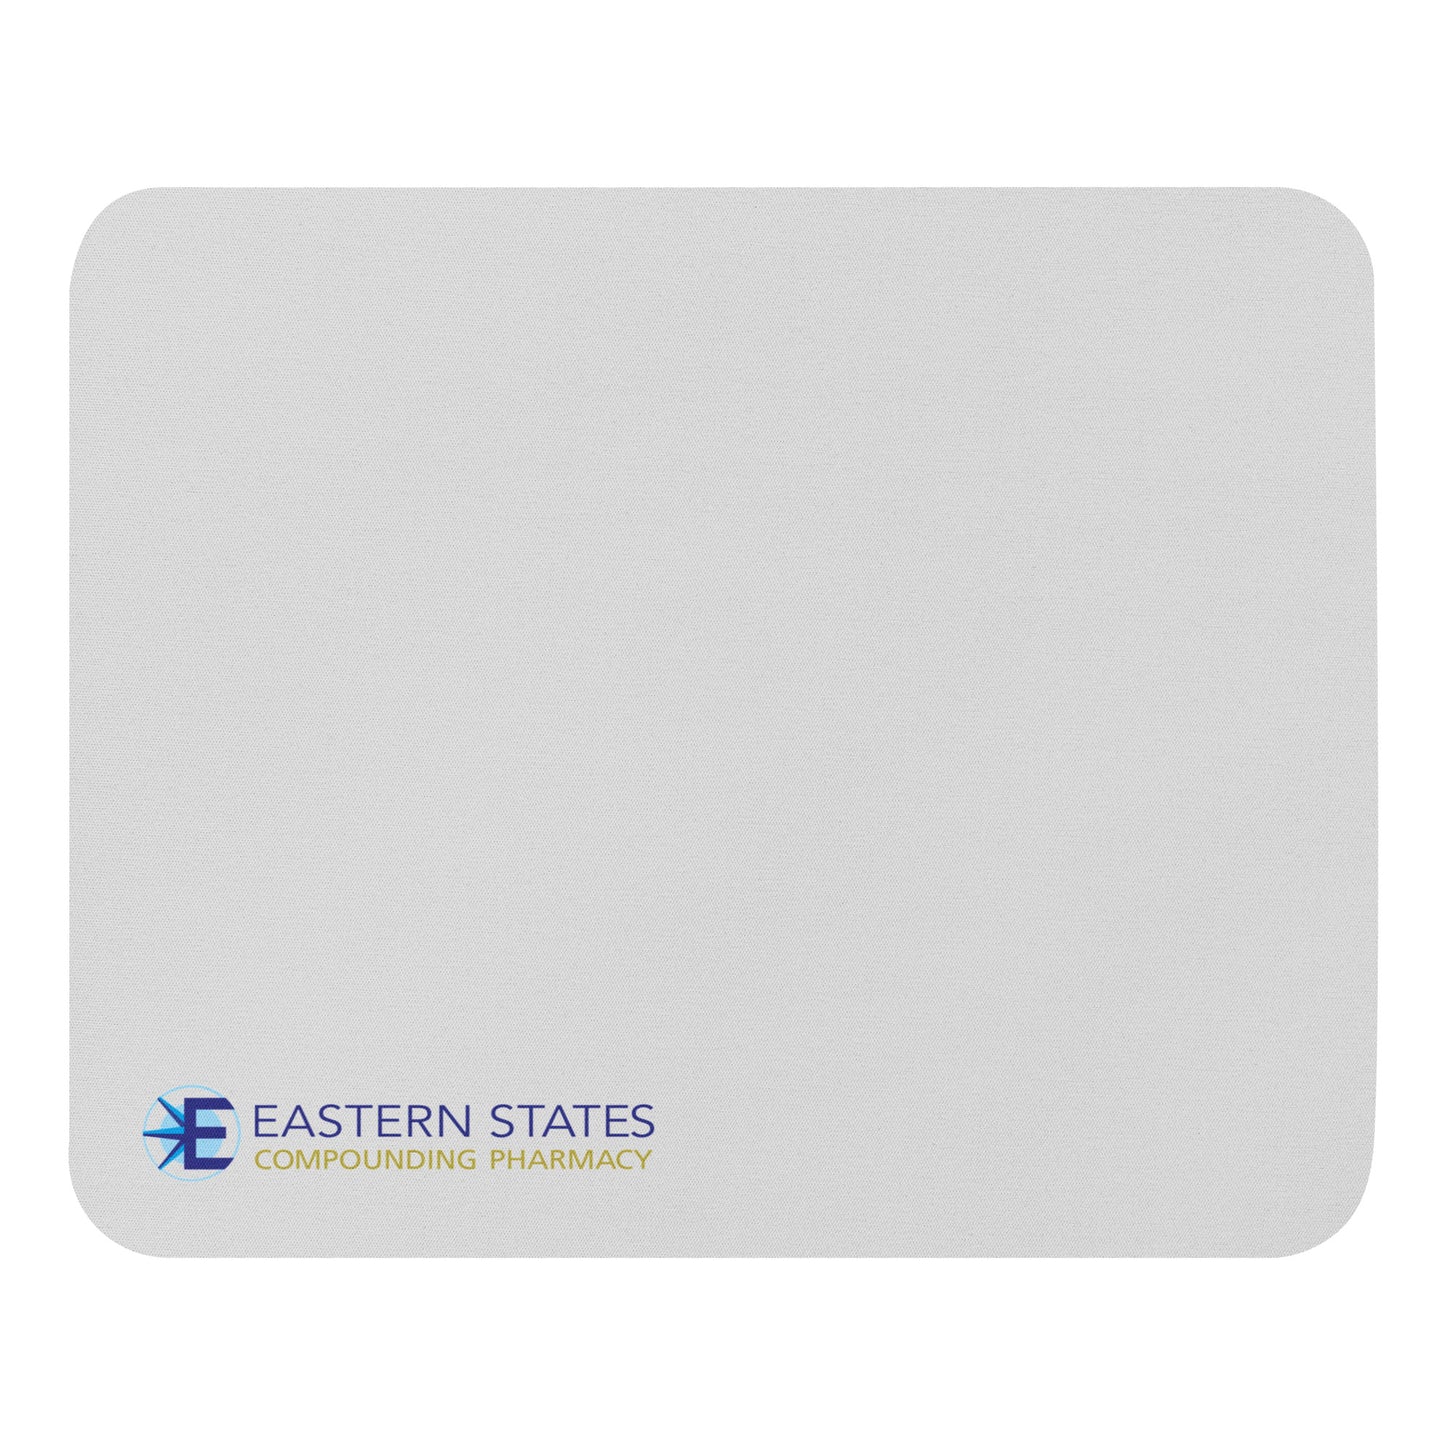 Mouse pad - Eastern States